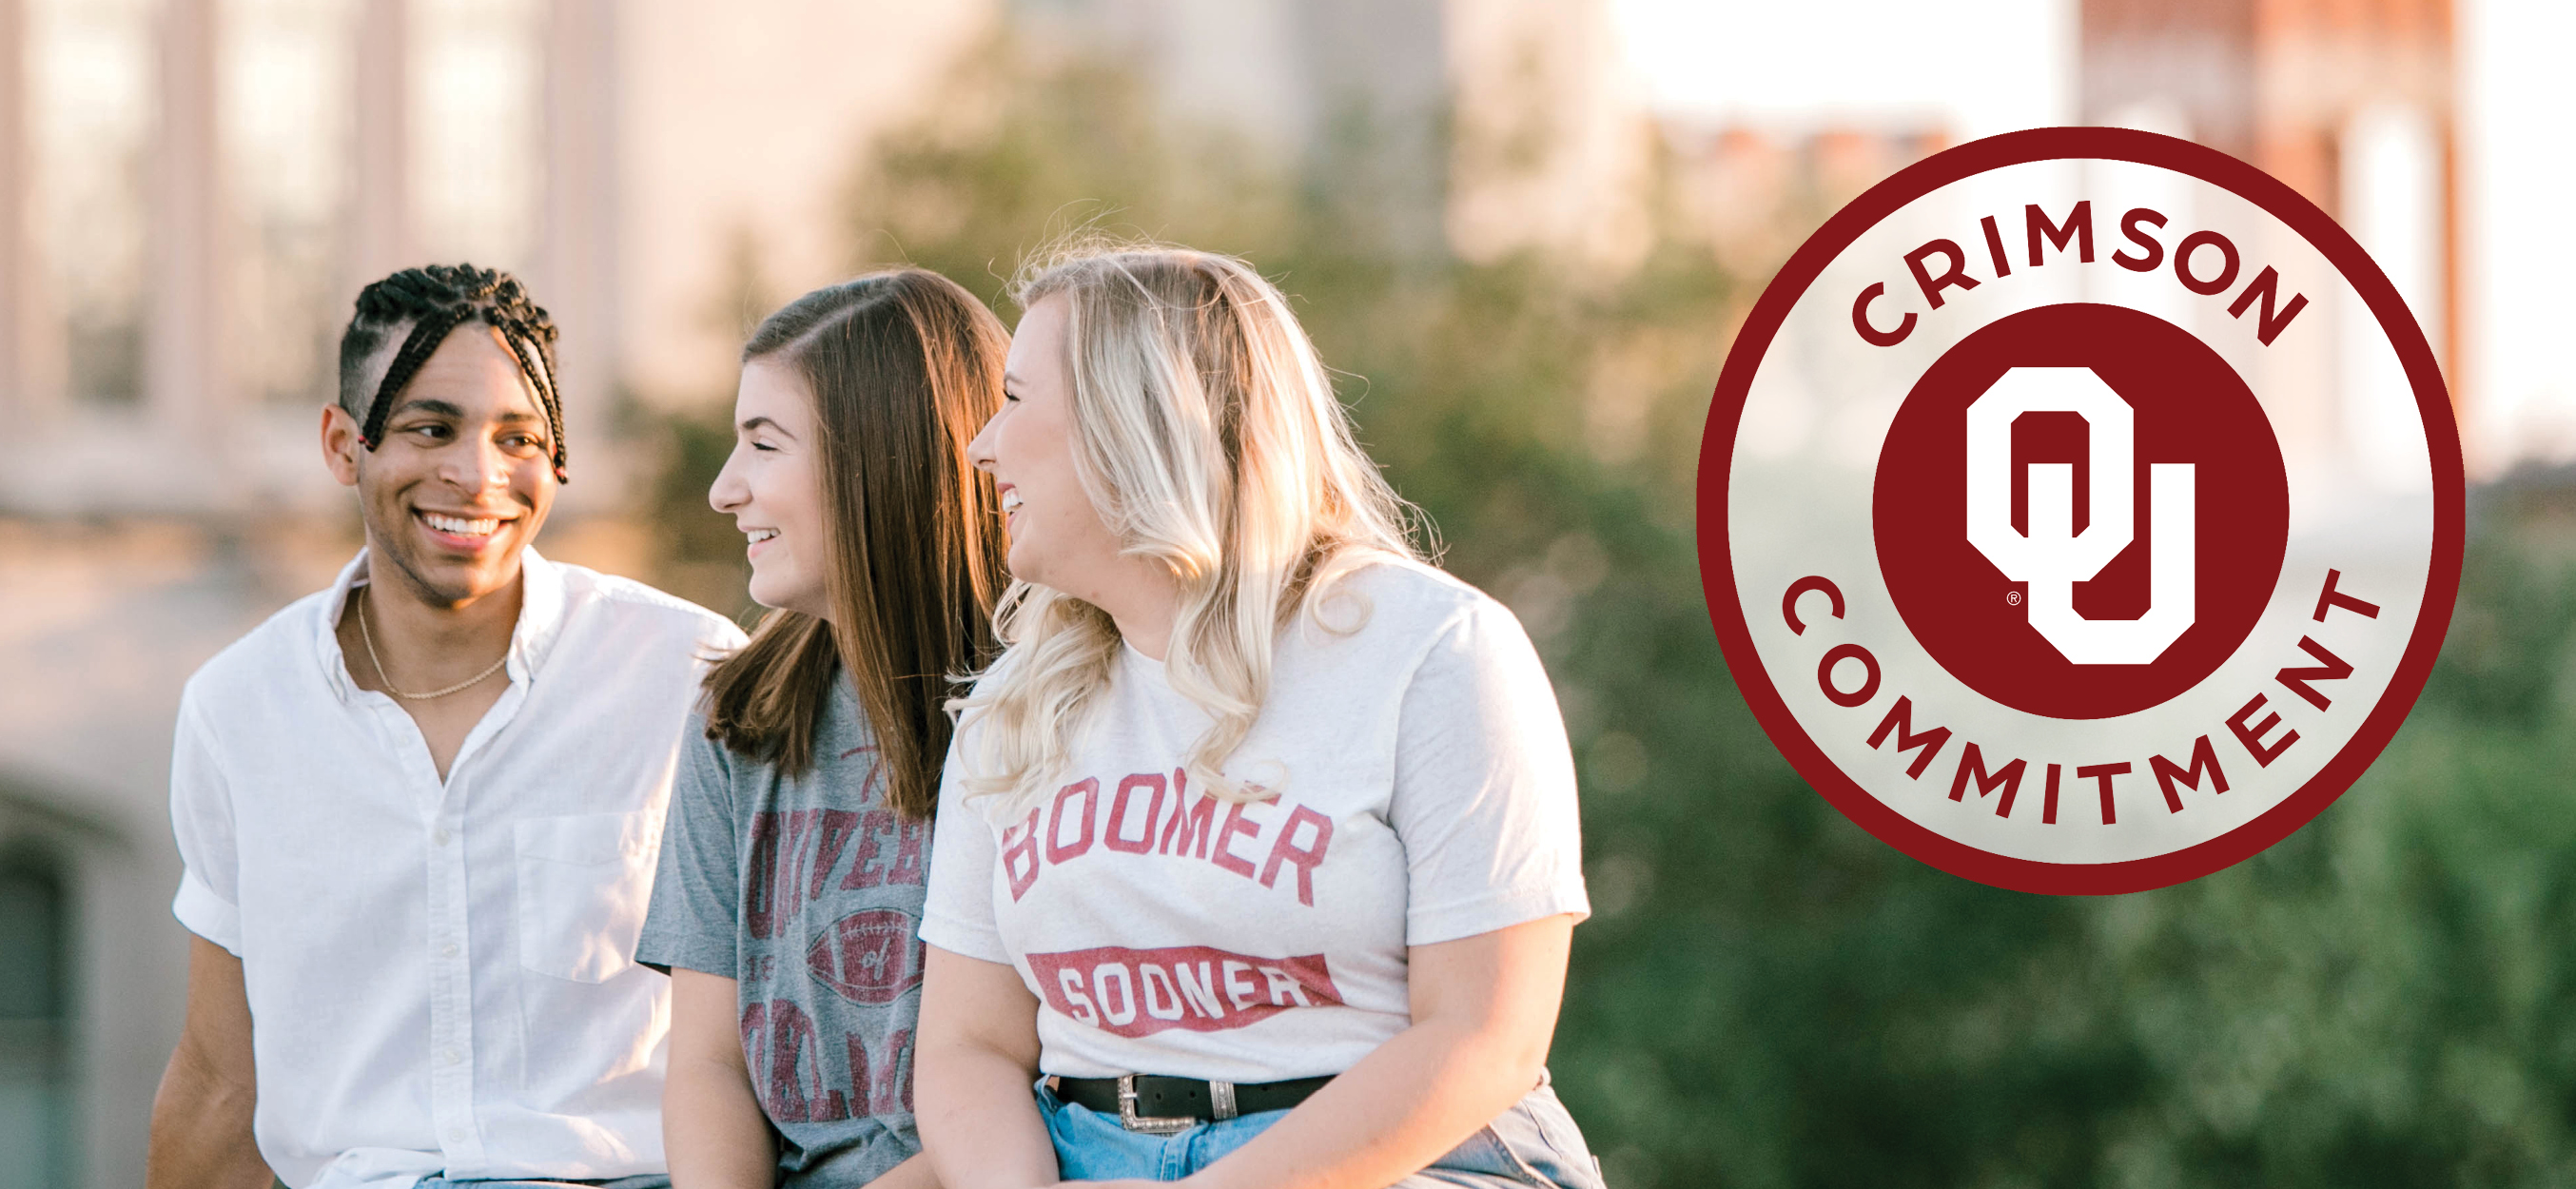 Crimson Commitment: Three students talking on OU campus